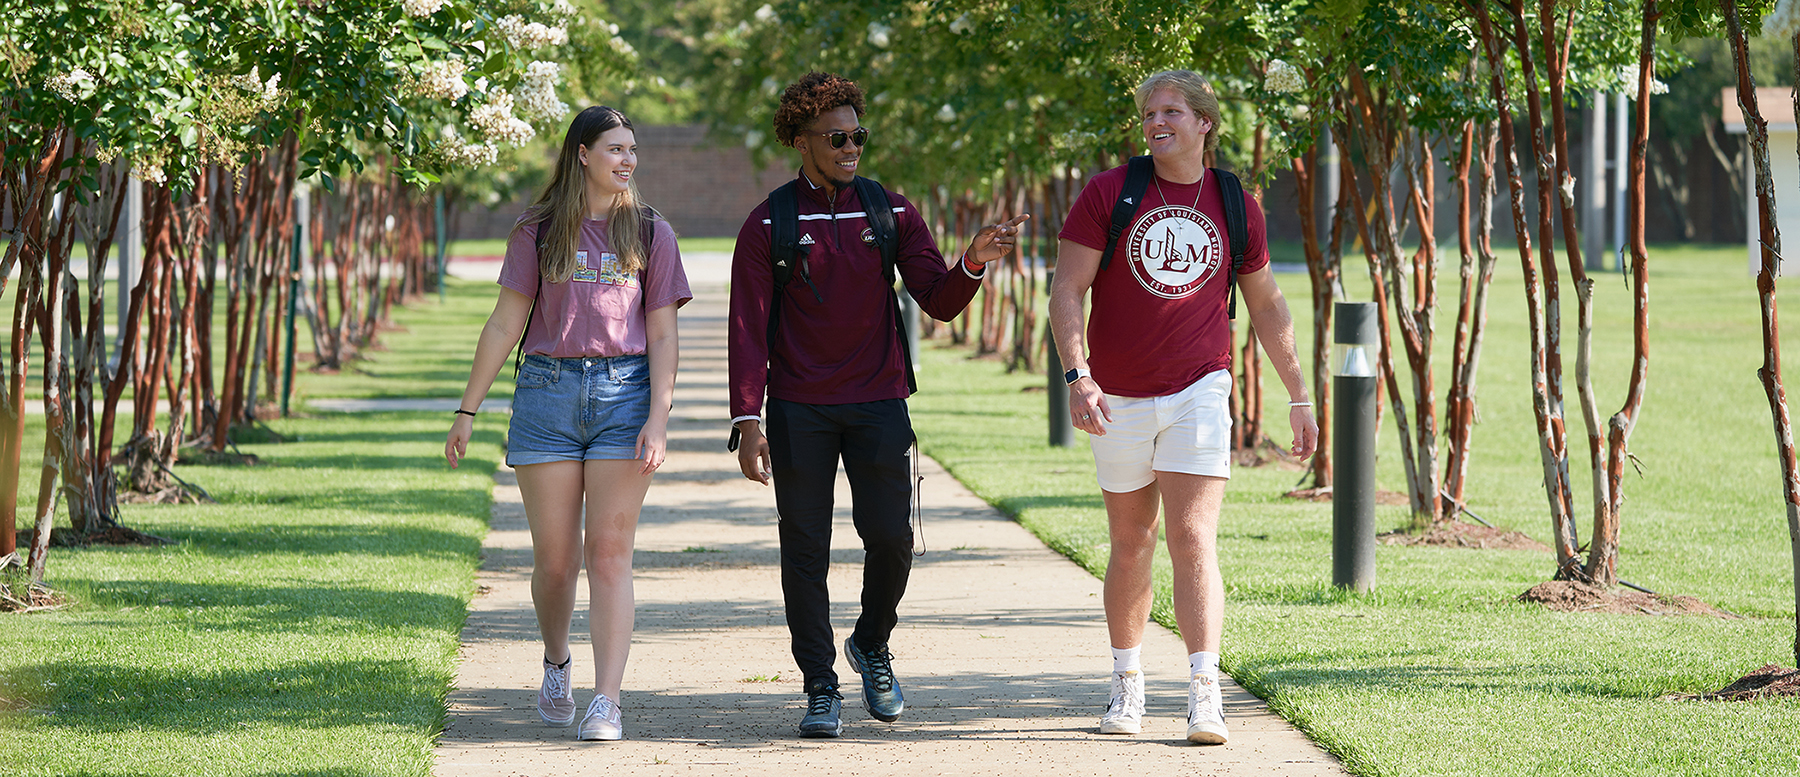 Three students walk along a sidewalk flanked by trees. The student in the middle points to his left. They are all smiling.